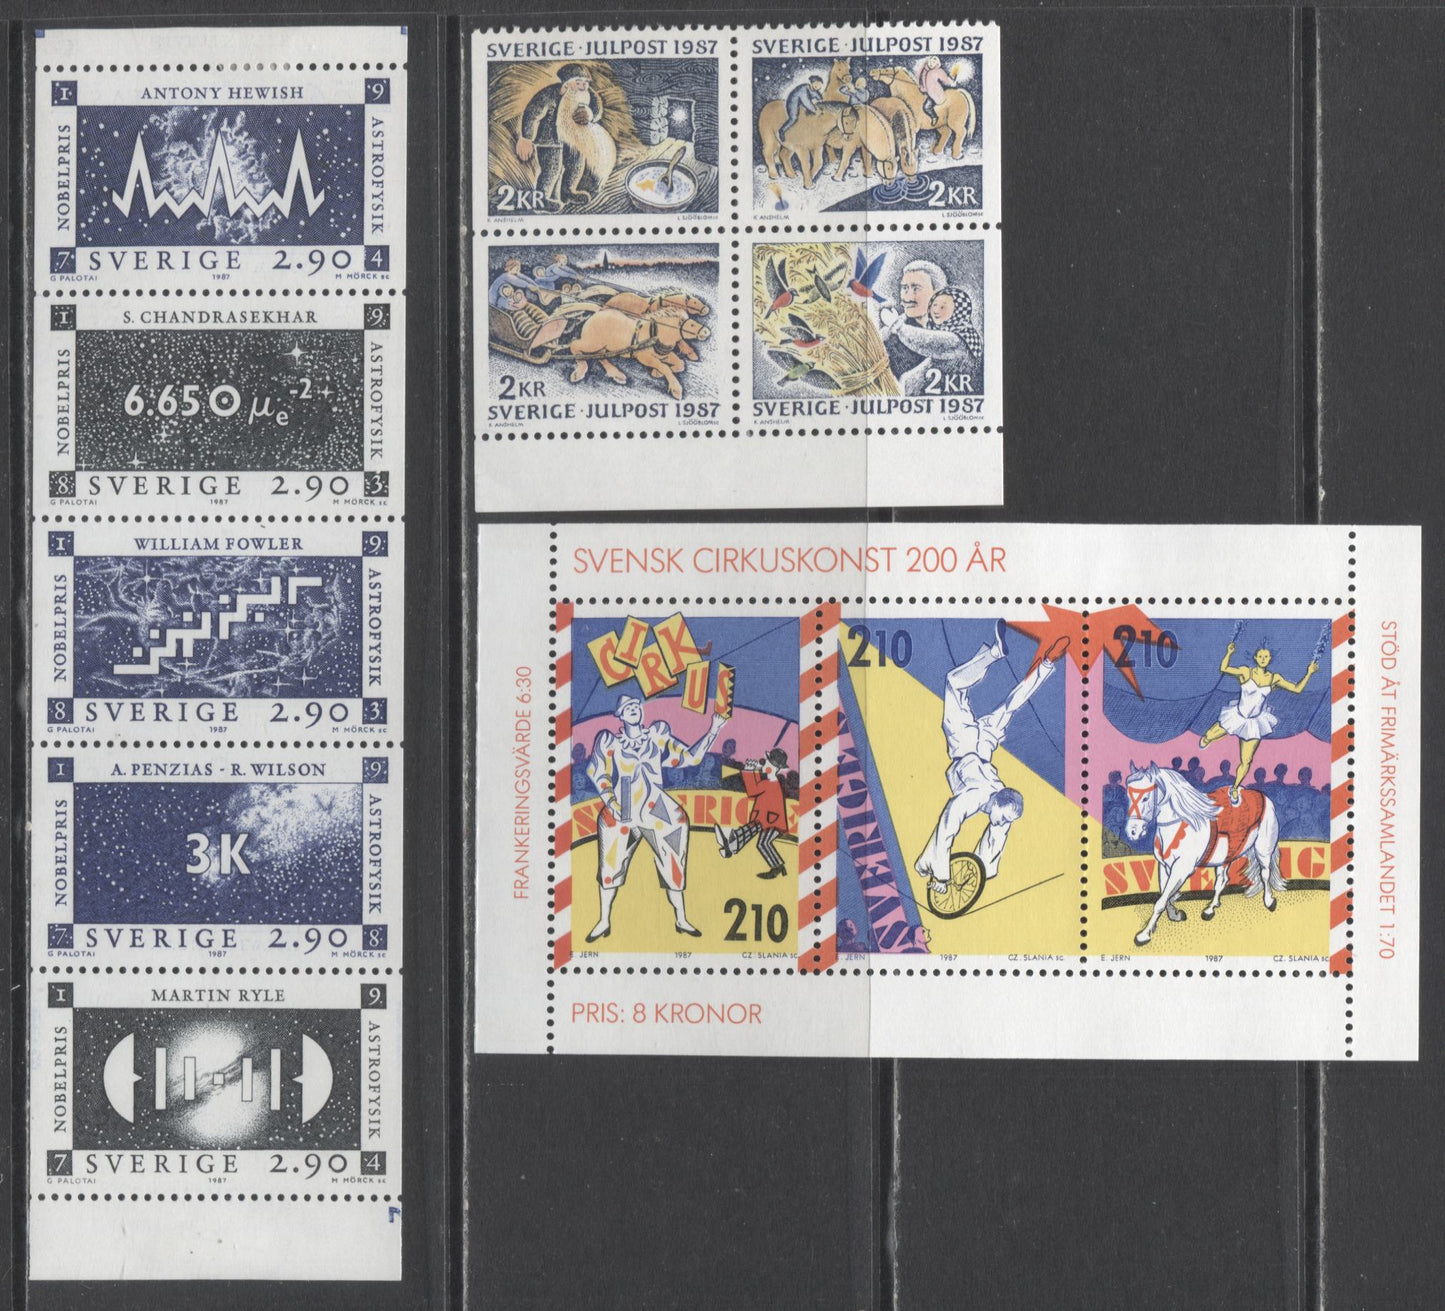 Lot 270 Sweden SC#1646-1671 1987-1988 Commemoratives, 26 VFNH/LH Singles, Pairs, Strips Of 3 & 5, & Blocks Of 4, Click on Listing to See ALL Pictures, 2017 Scott Cat.$32.25 USD